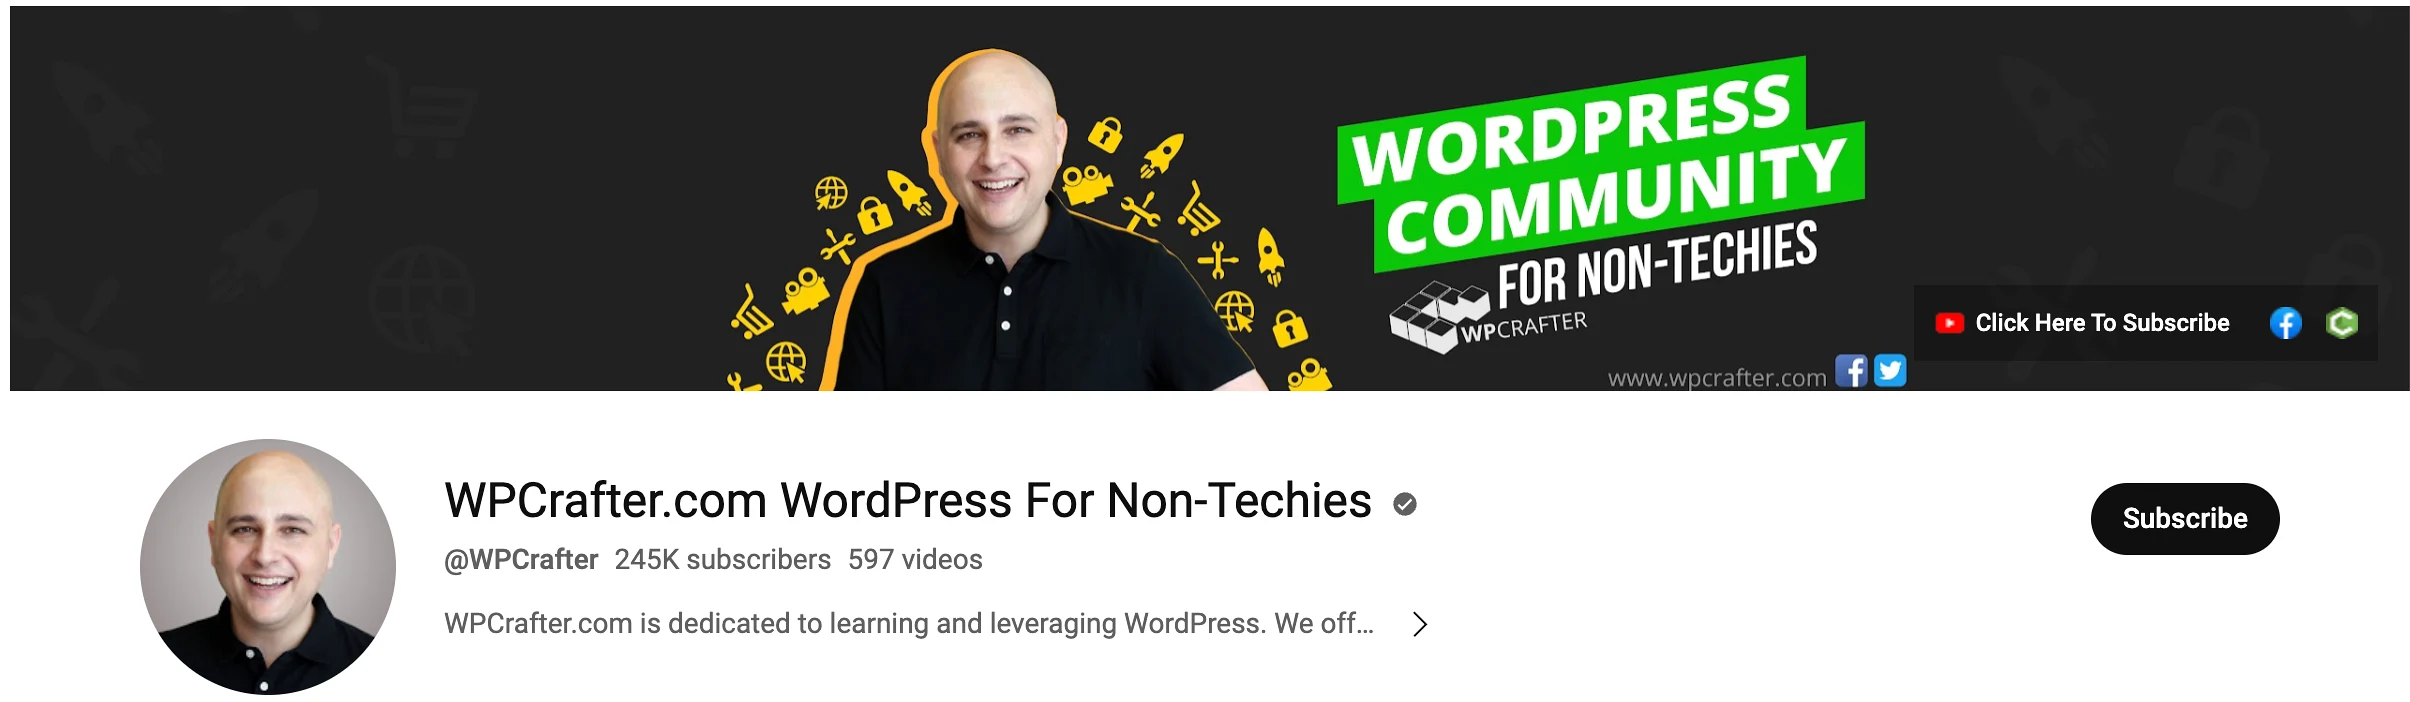 WPCrafter - Best Youtube Channels for Learning WordPress